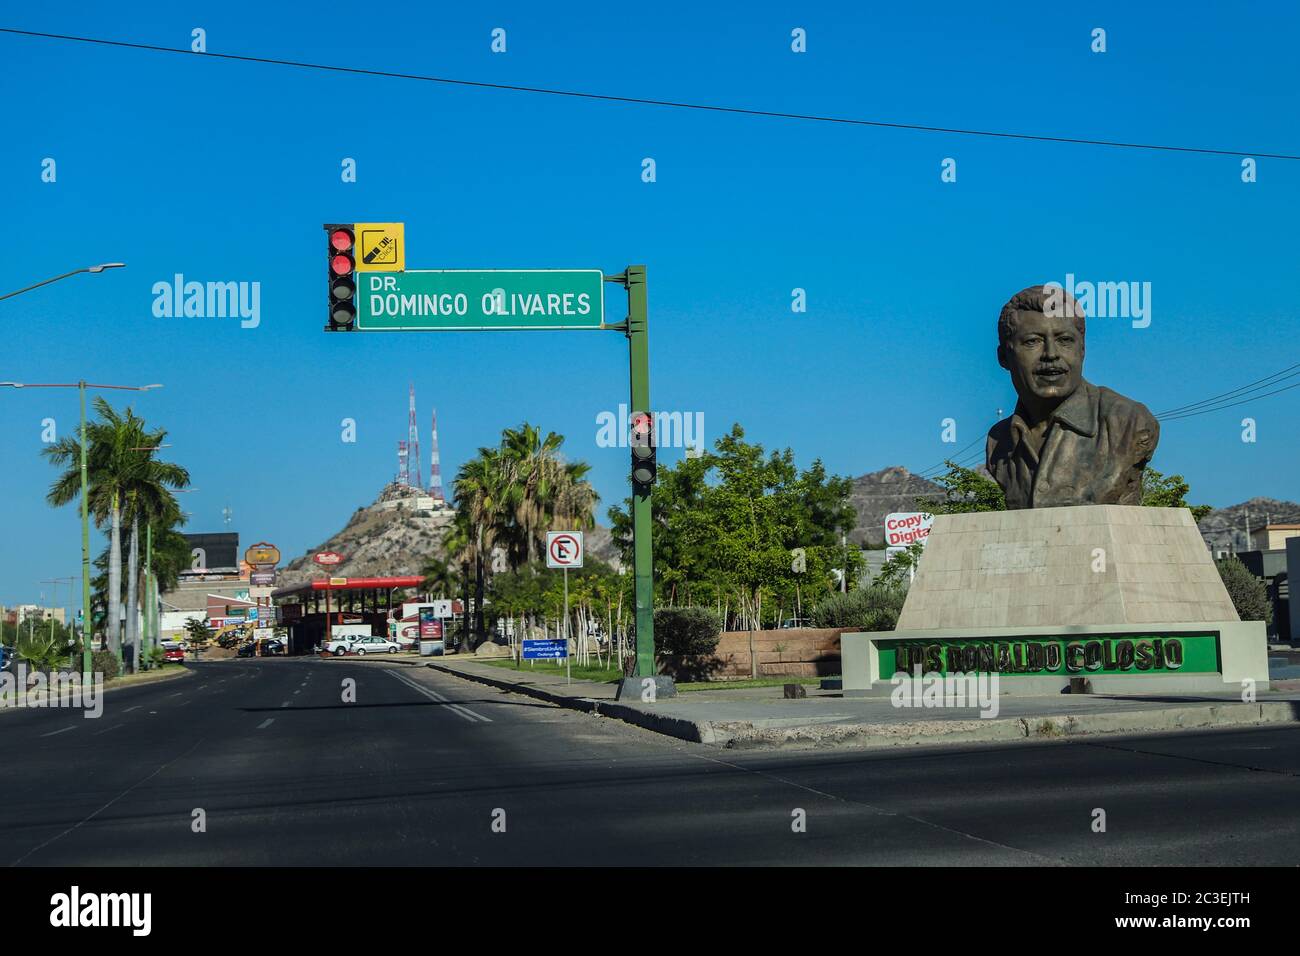 HERMOSILLO, MEXICO - JUNE 18:  The main streets and boulevards of the city center look lonely after starting the fines for motorists today, they do not have a pass that justifies circulating after 6 pm on June 18, 2020 in Hermosillo, Mexico. Lockdown restrictions ease as half of the states switch to orange level of alert and the capital amongst other states remain in red alert.  (Photo by Luis Gutierrez/Norte Photo). Calle Luis Donaldo Colosio, Estatua de Colosio, Pri, Martir , calle Domingo Olivares, Cerro de la Campana, verano en Hermosillo.    HERMOSILLO, MÉXICO - 18 DE JUNIO: Las principal Stock Photo